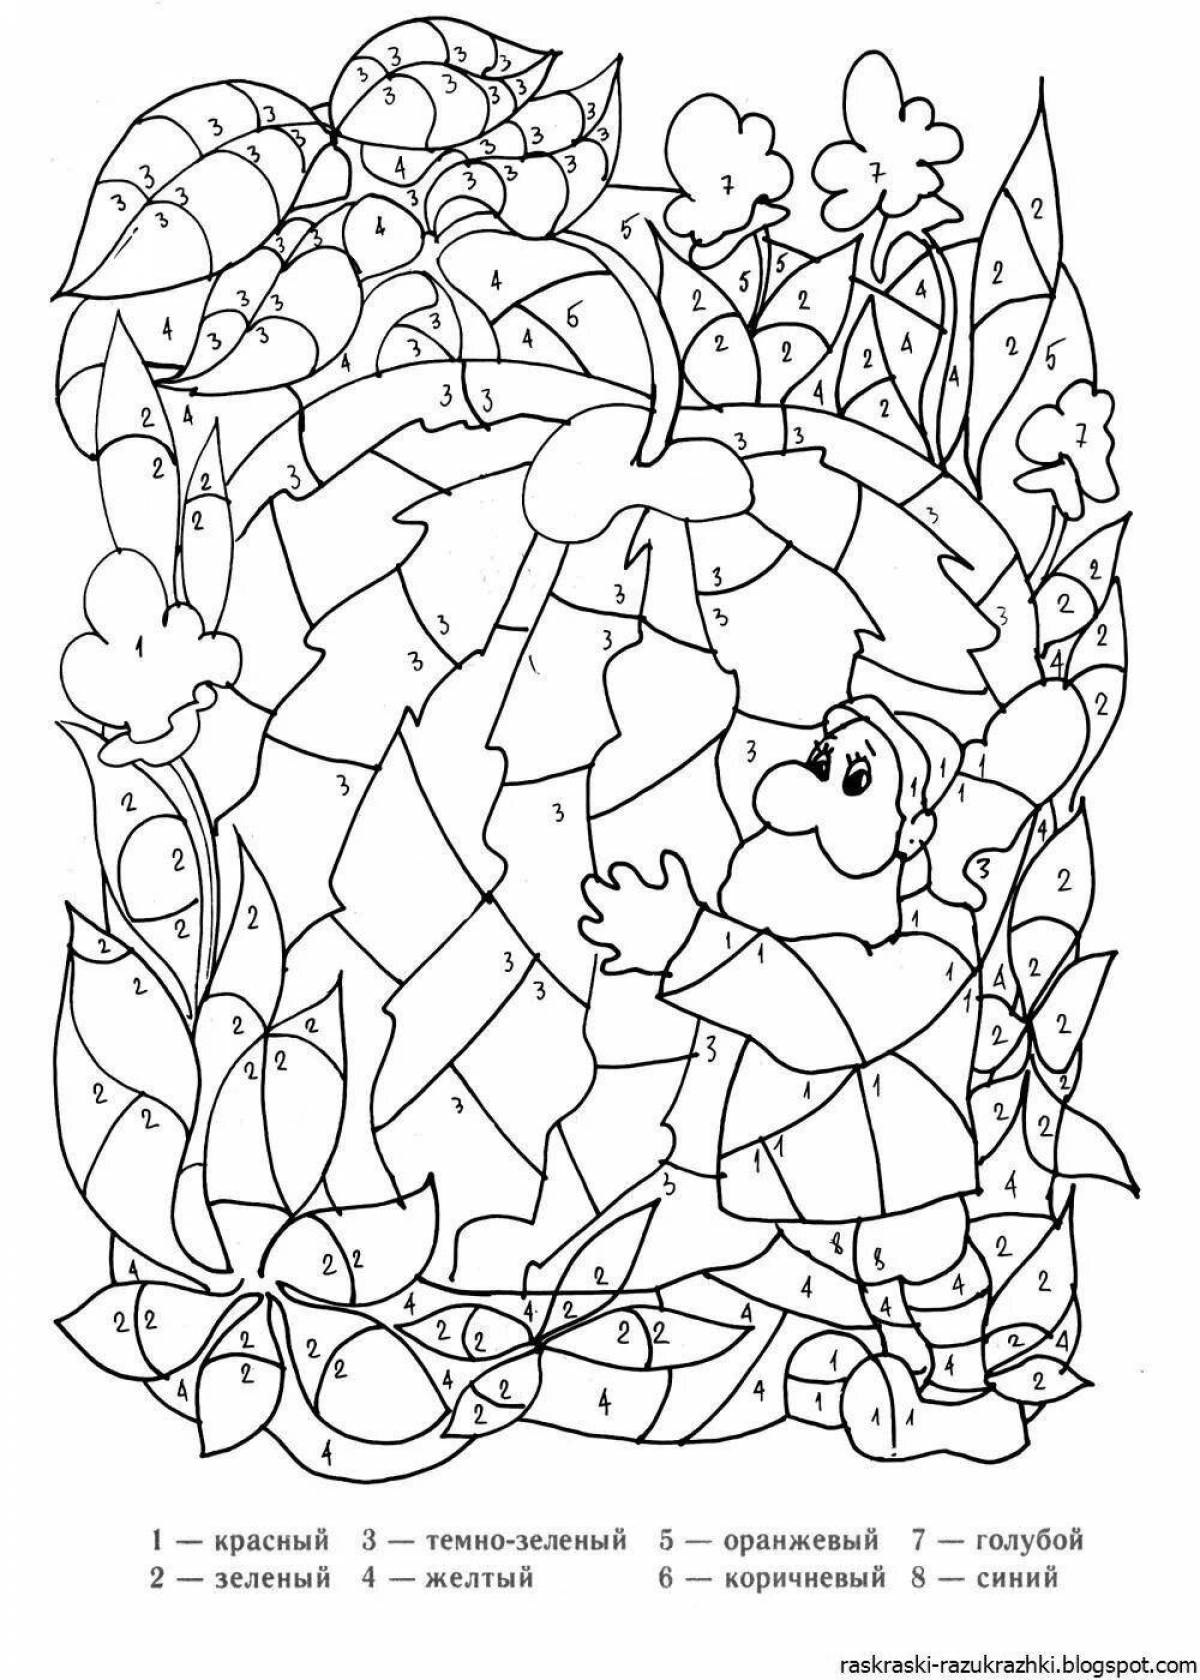 Colourful coloring book for children with colored numbers